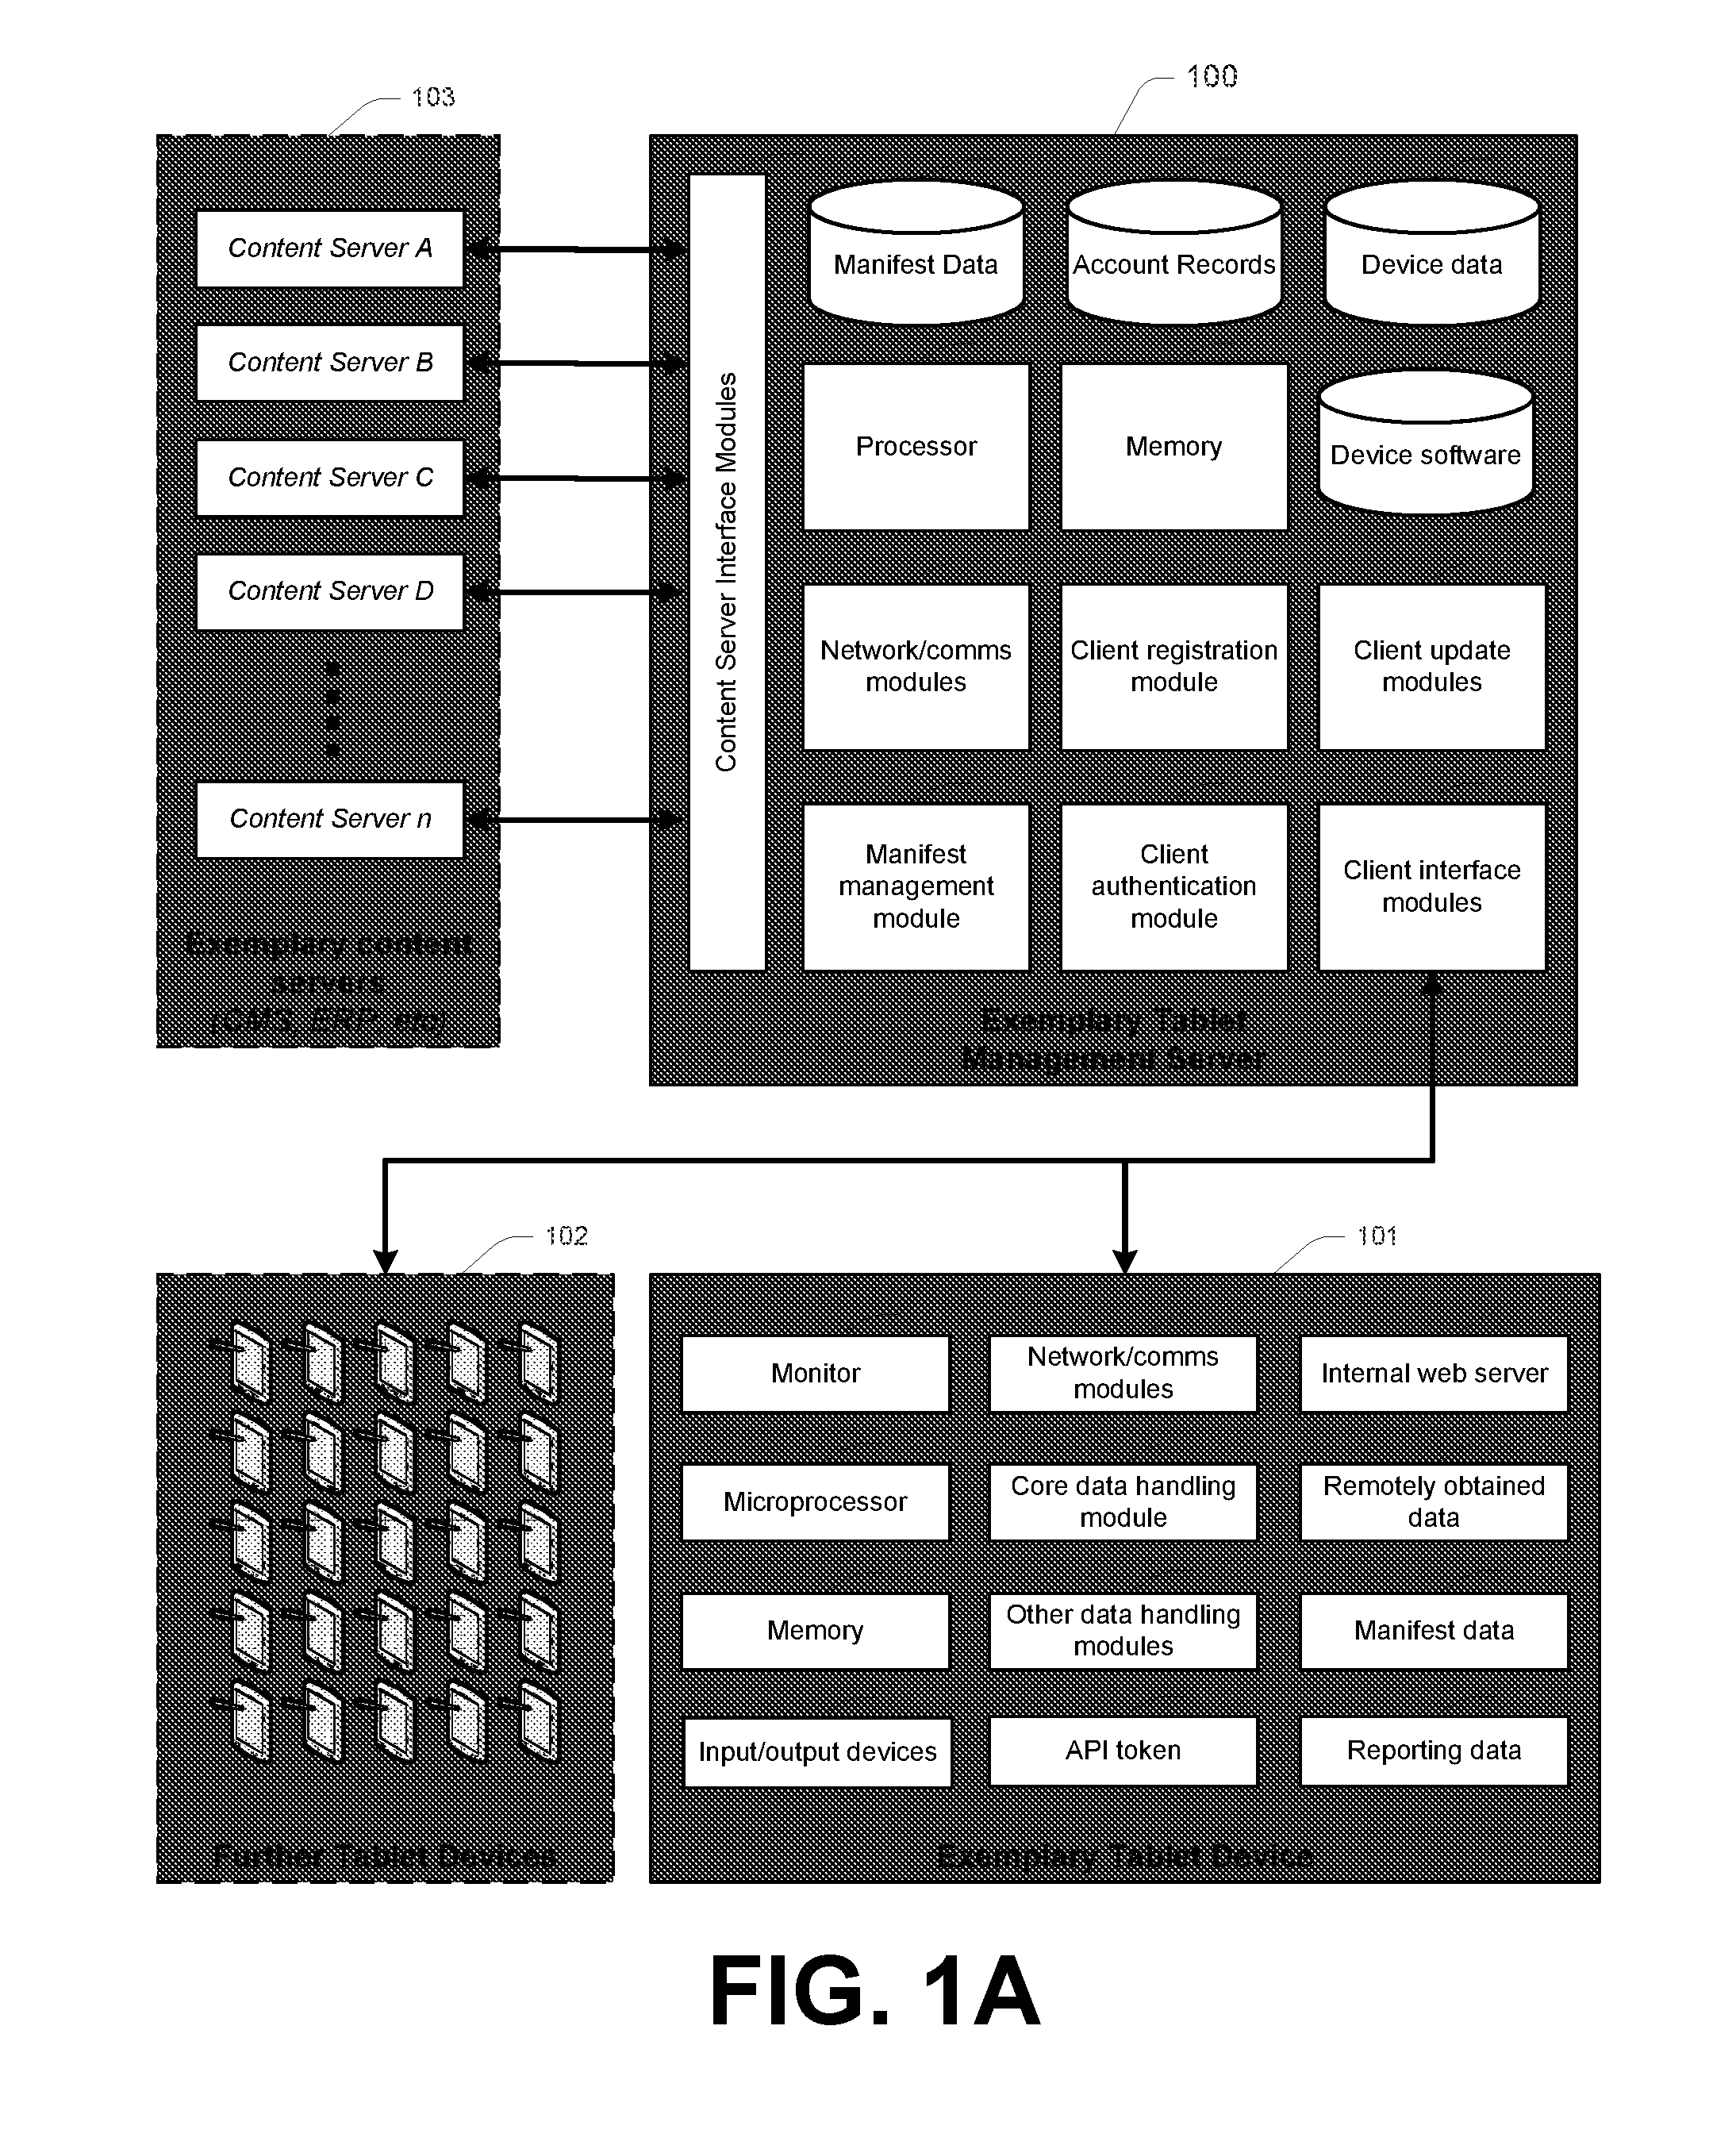 Technology adapted to enable devices for delivering data in a lockdown mode, methods for operating such devices, and reporting on activity at table devices that provide remote content